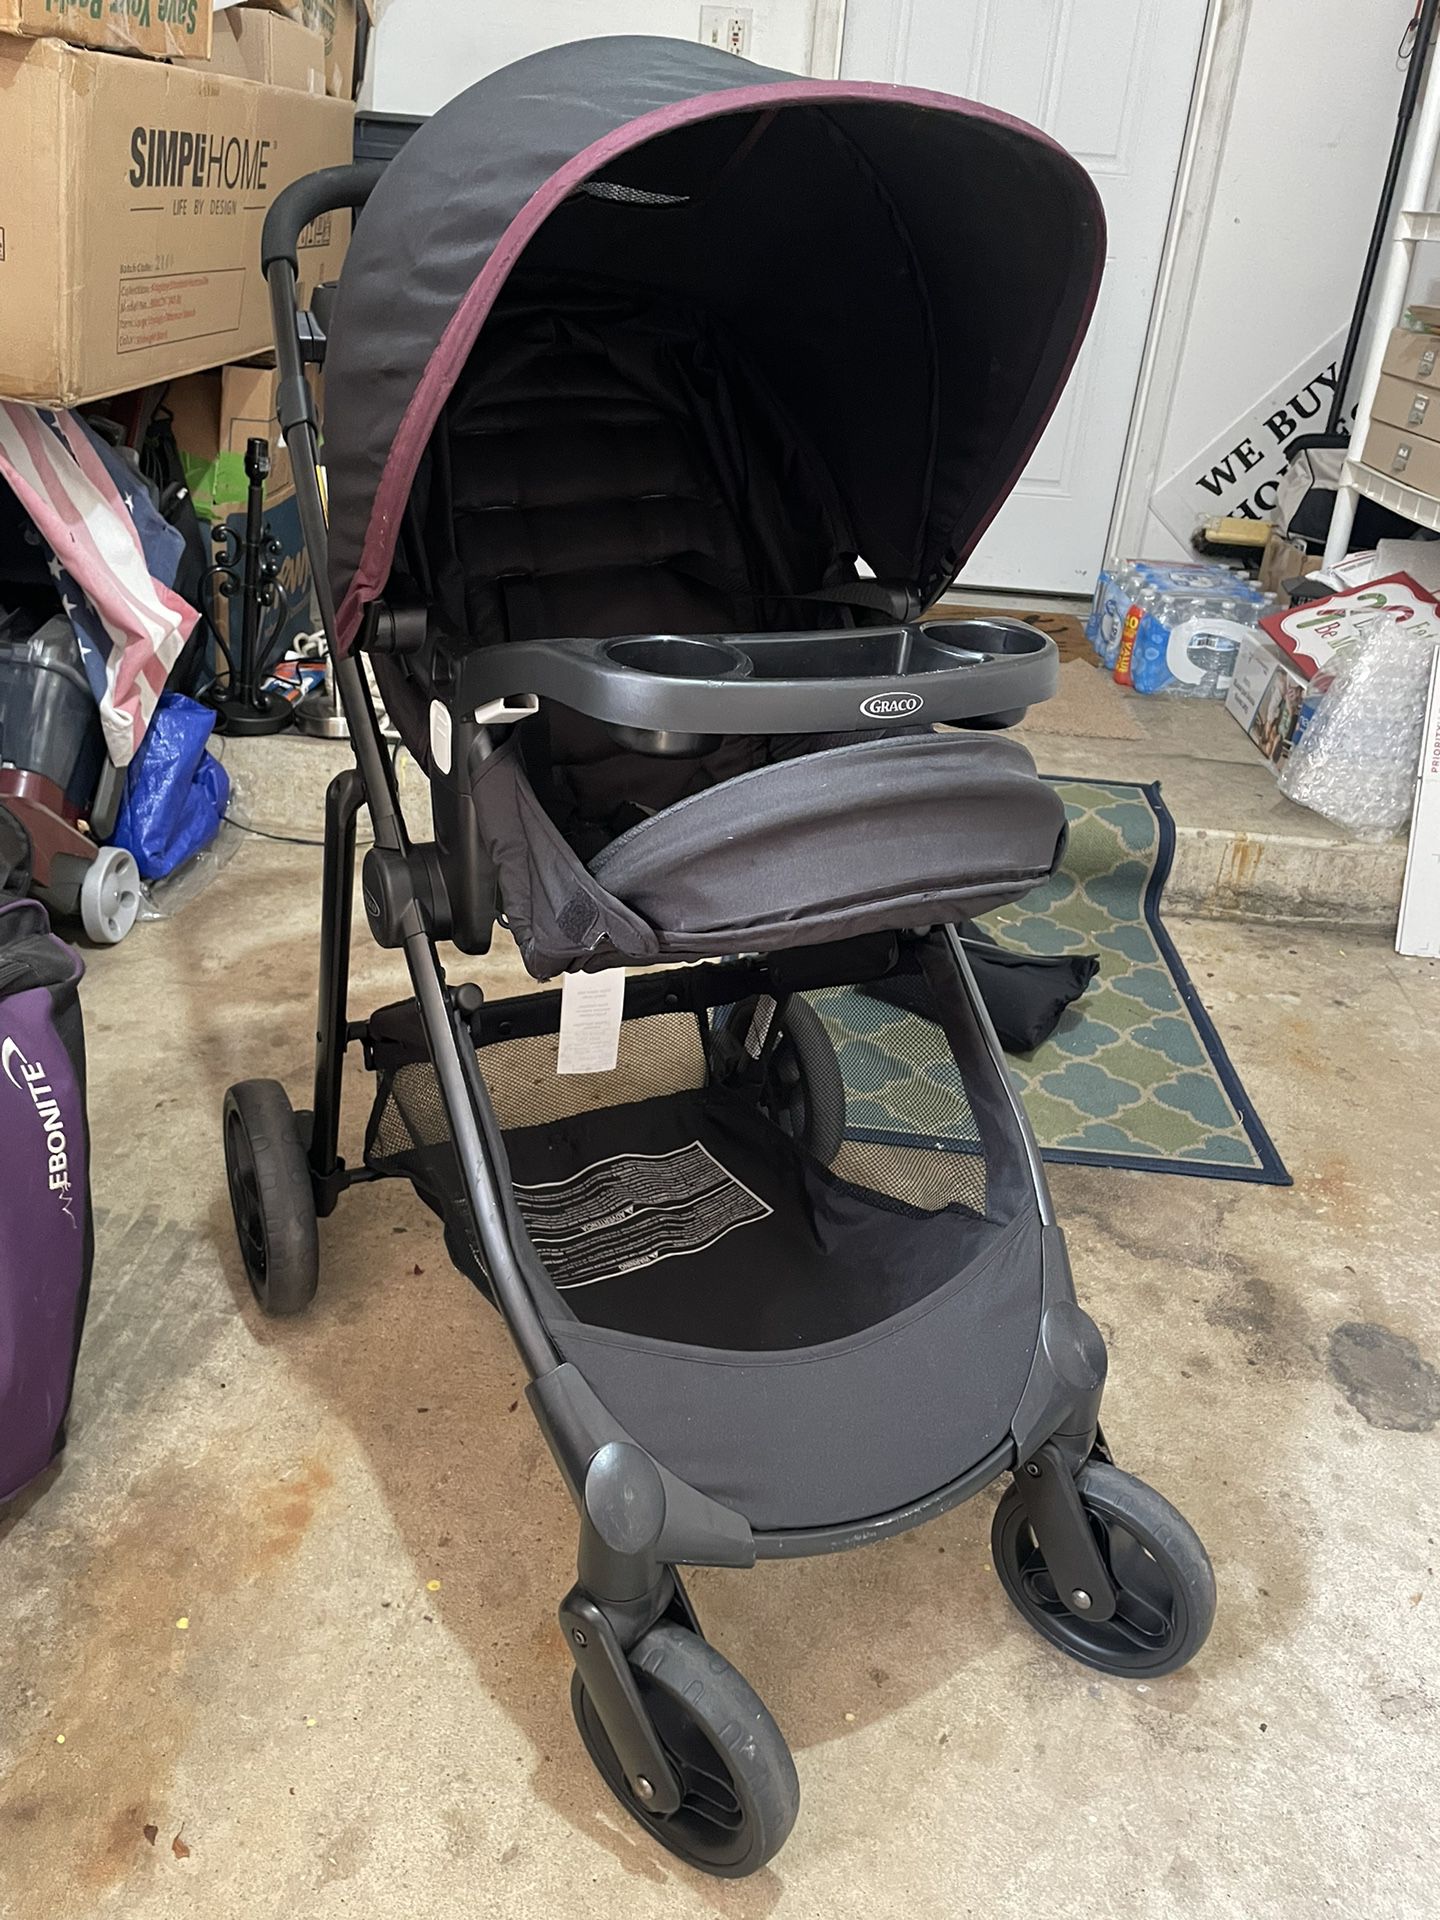 Graco Modes Element DLX Travel System Baby Toddler Stroller w/ Shade Cover, Cup Holder, Storage, Seat, CLEAN *NEW CONDITION*